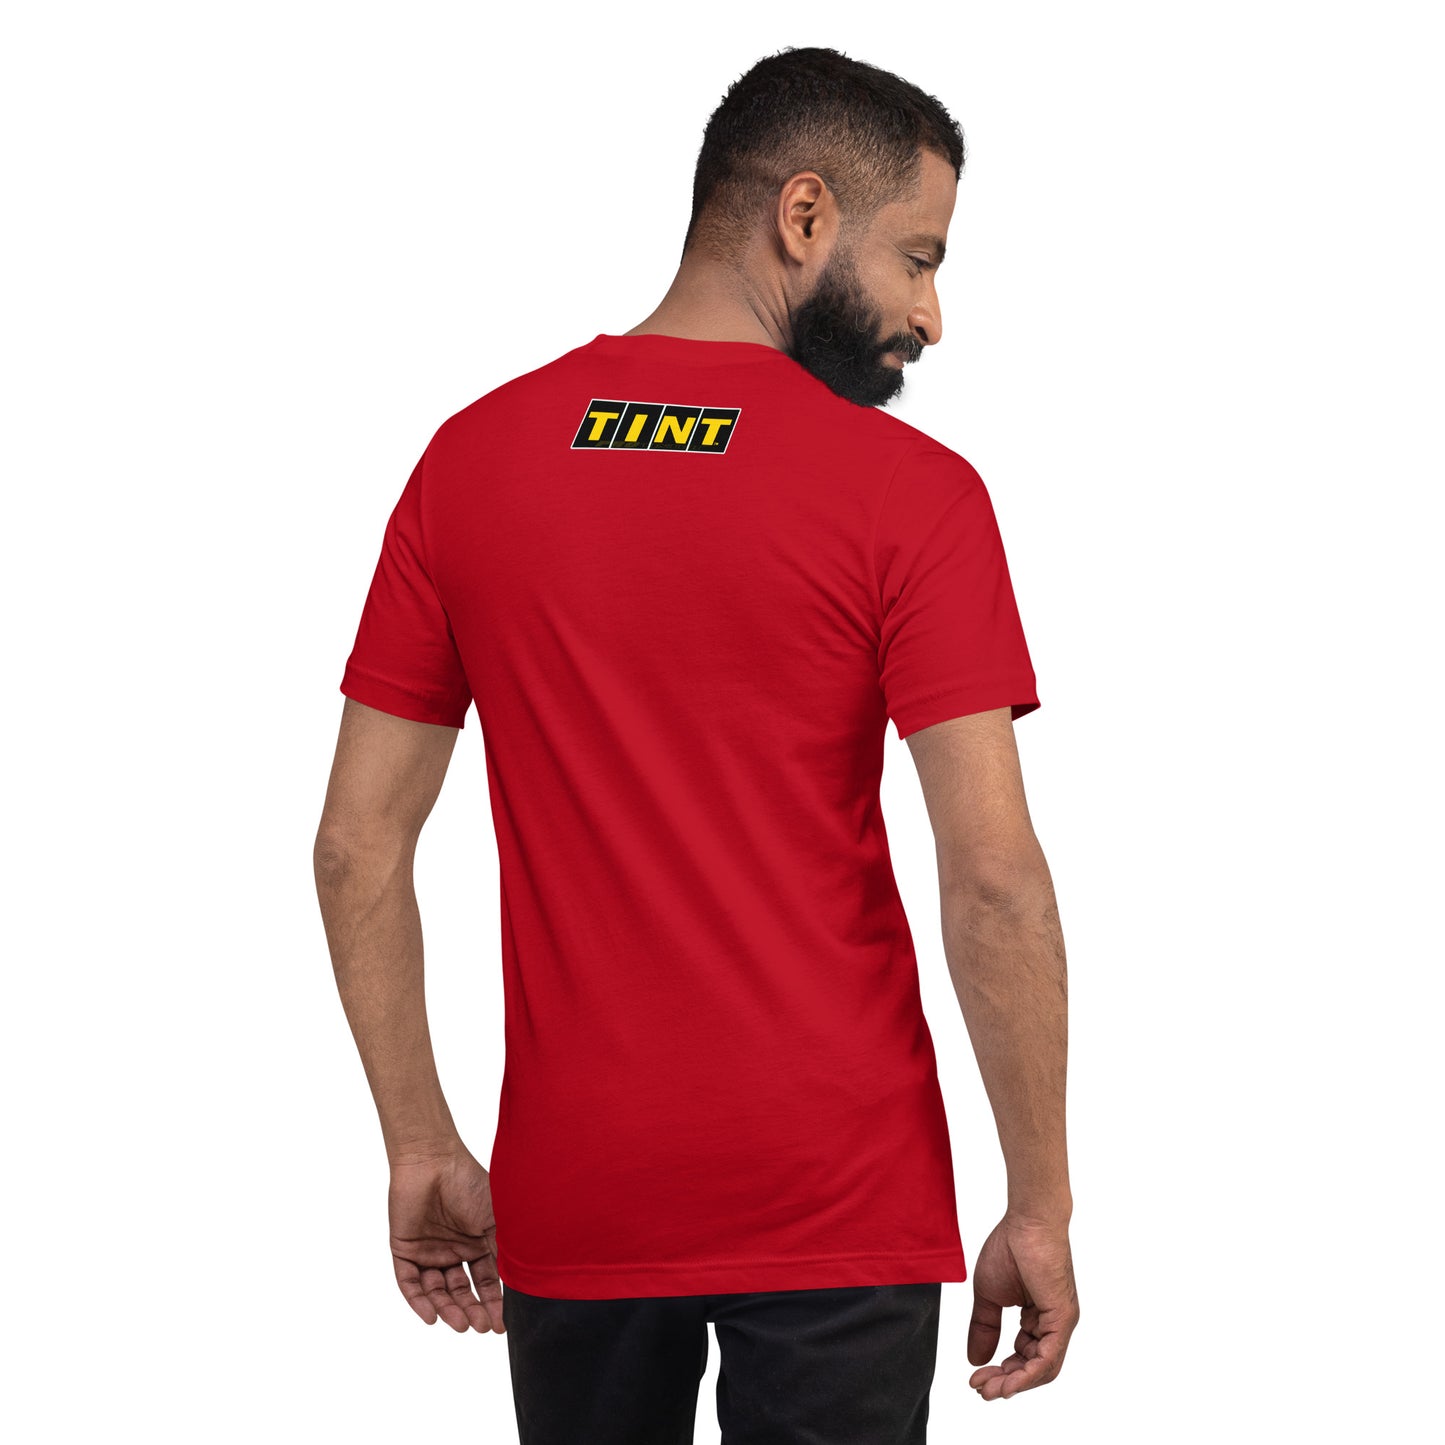 Packing Heat by Pro Tinter Unisex T-Shirt (On Sale)